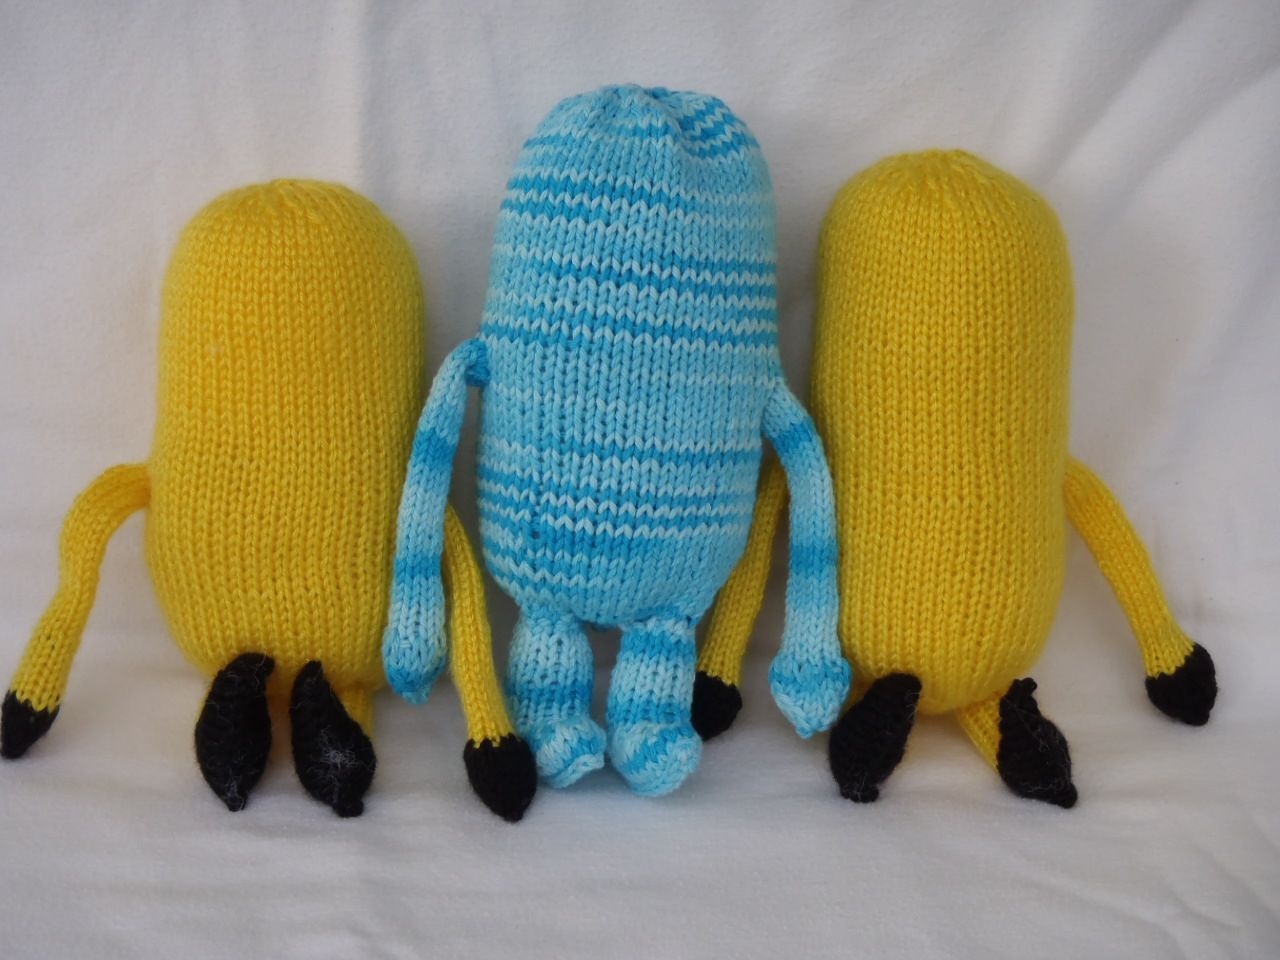 30+Great Photo of Knitting Patterns For Minions #minionpattern Knitting Patterns…